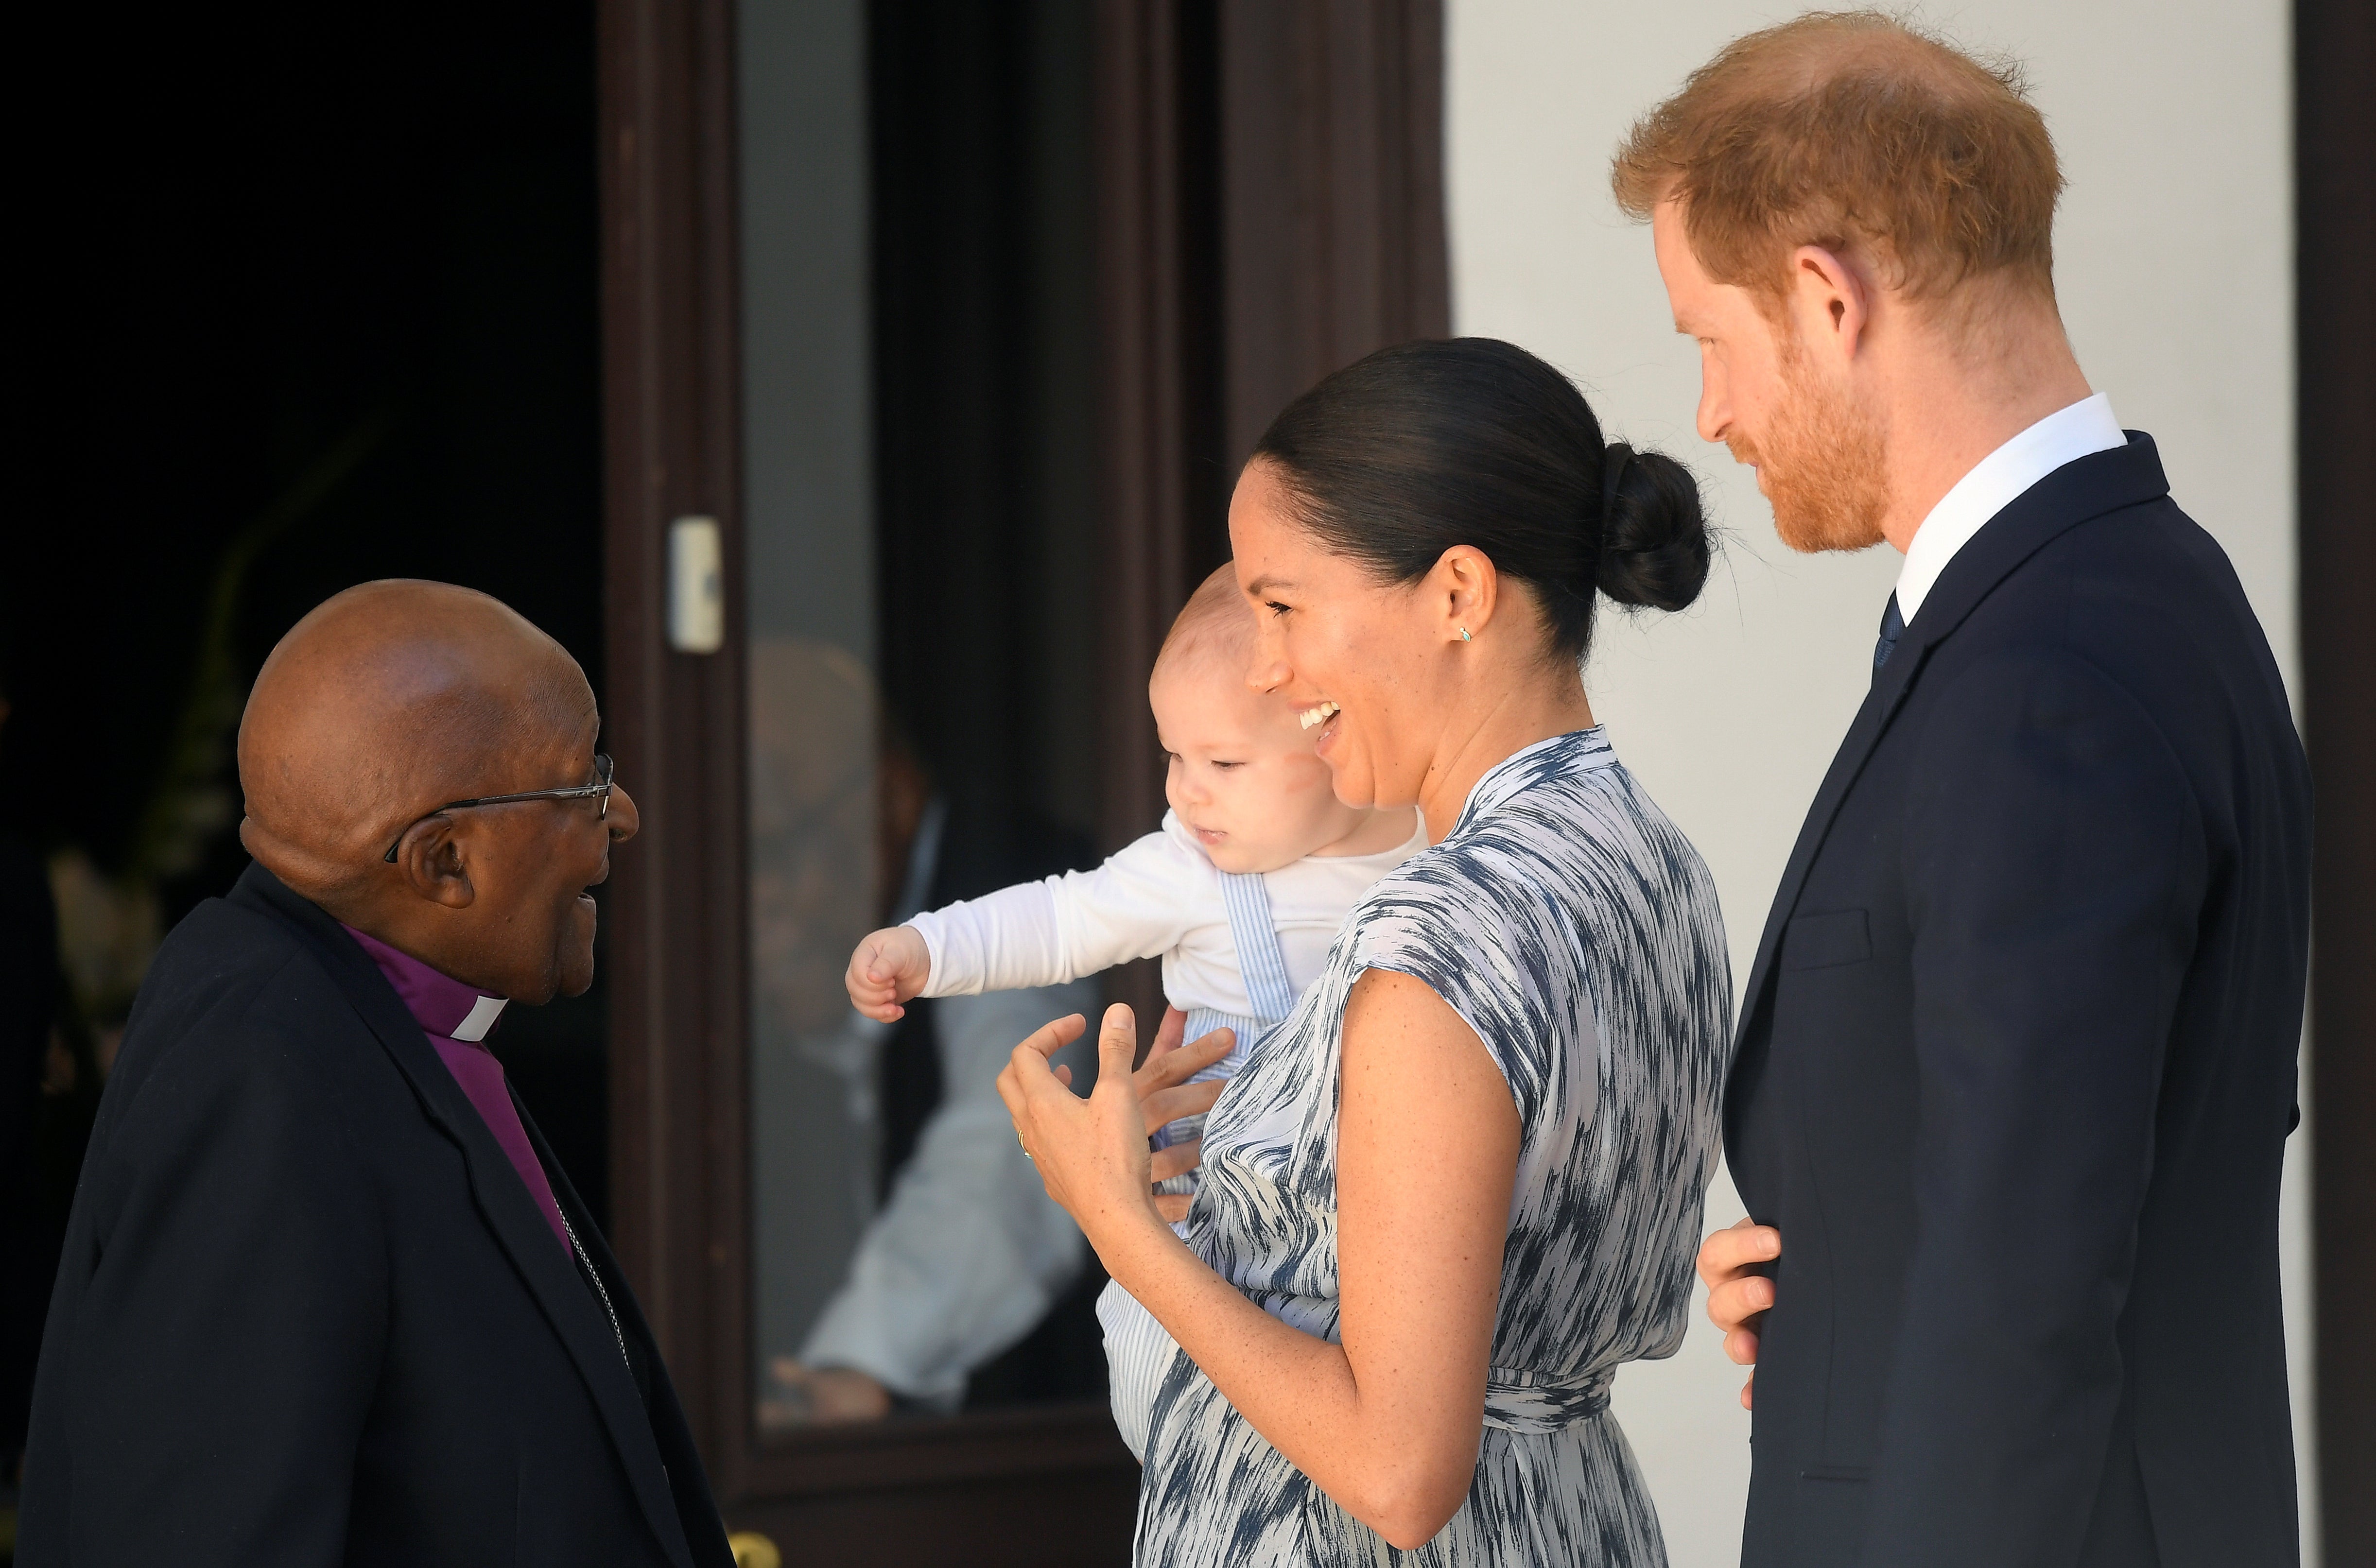 The Duke and Duchess of Sussex with their son Archie meeting Archbishop Desmond Tutu in 2019 (Toby Melville/PA)